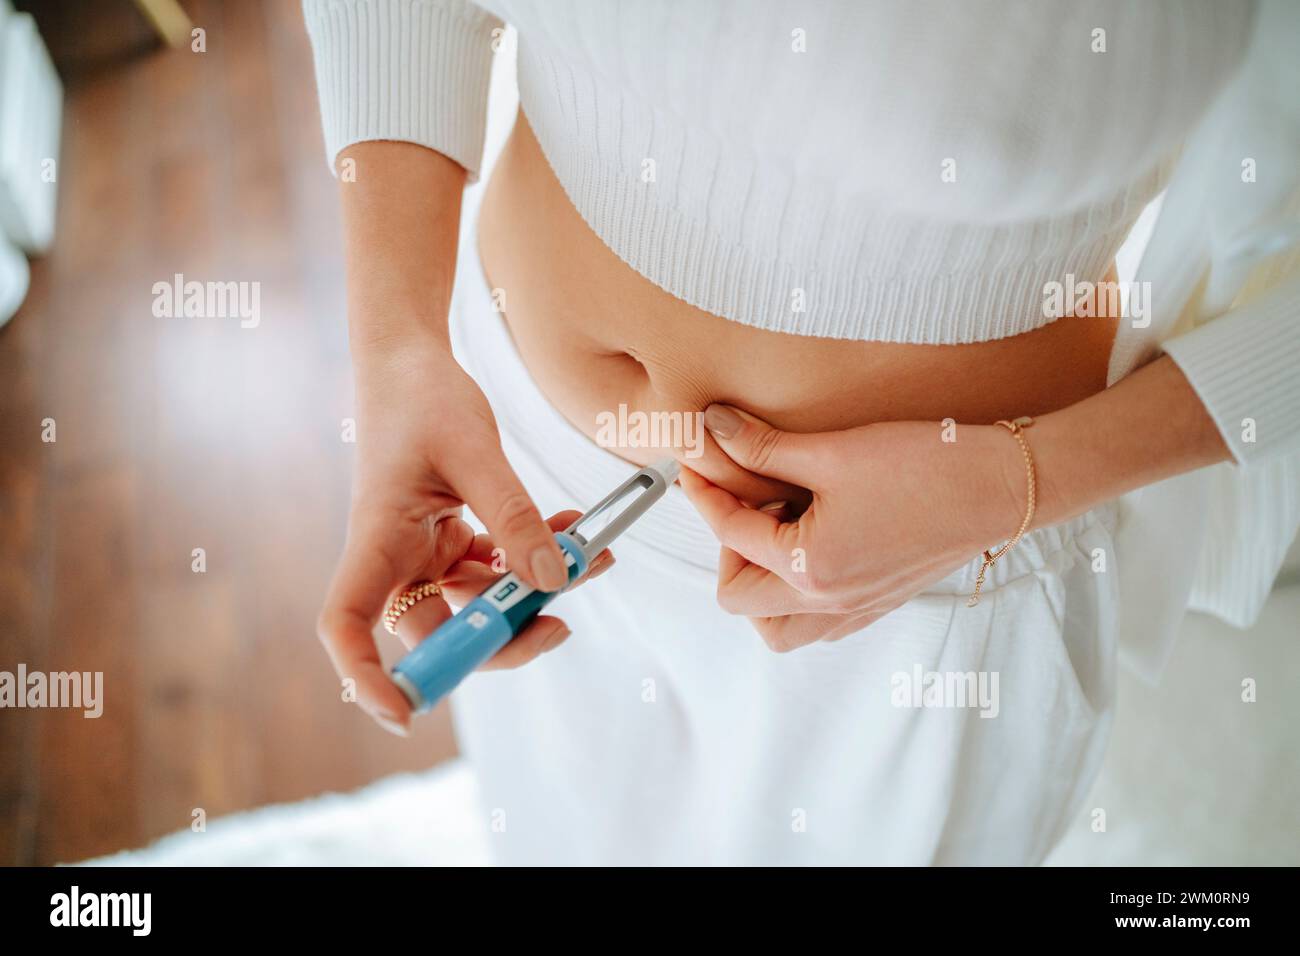 Woman injecting insulin pen in stomach at home Stock Photo